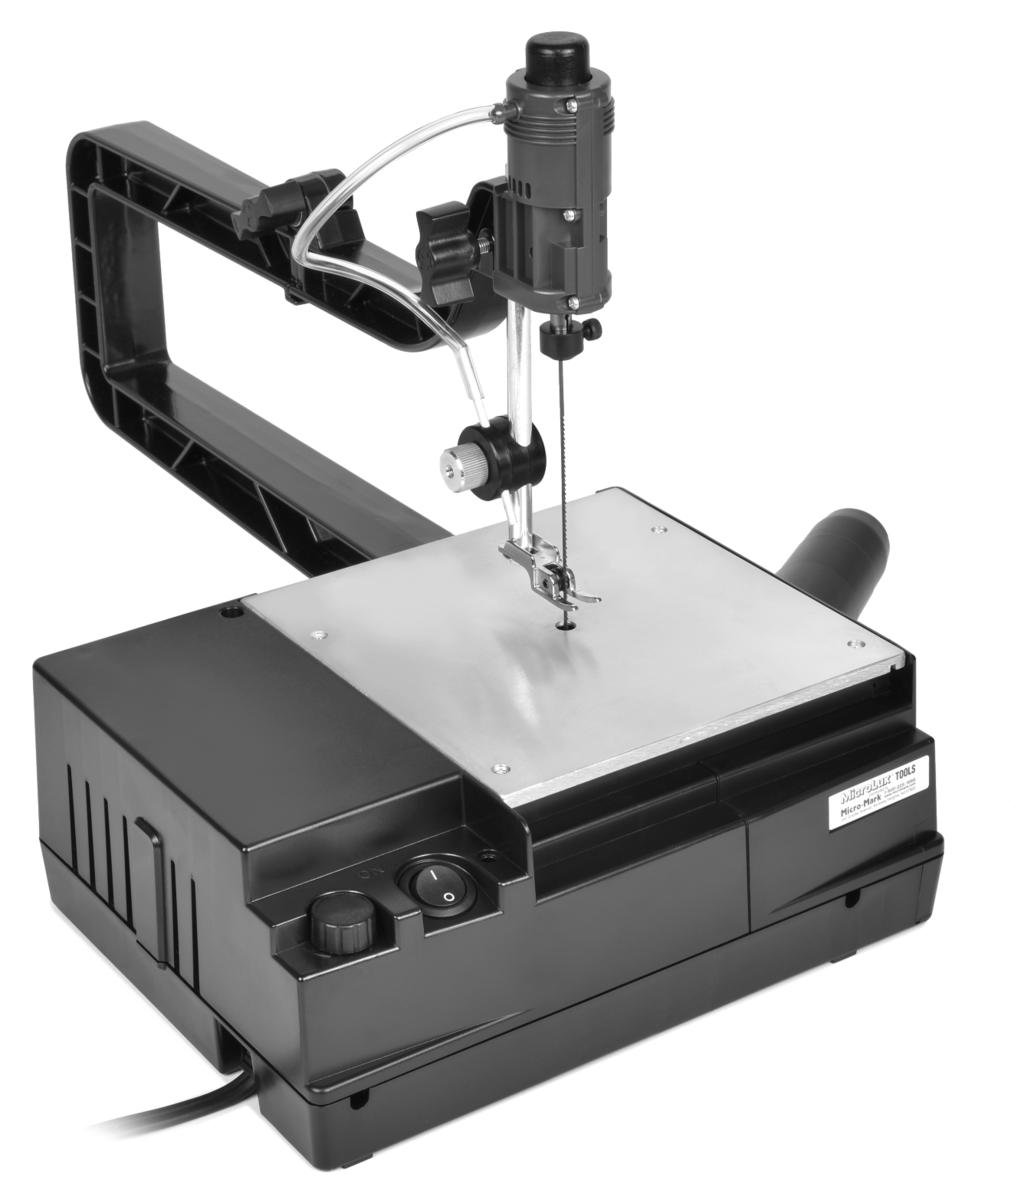 Operating Instructions for #87776 MicroLux Multi-Saw Dear Customer: The MicroLux Multi-Saw is a high performance tool for every model maker, and is ideal for the sawing of curves in wood, plastic and